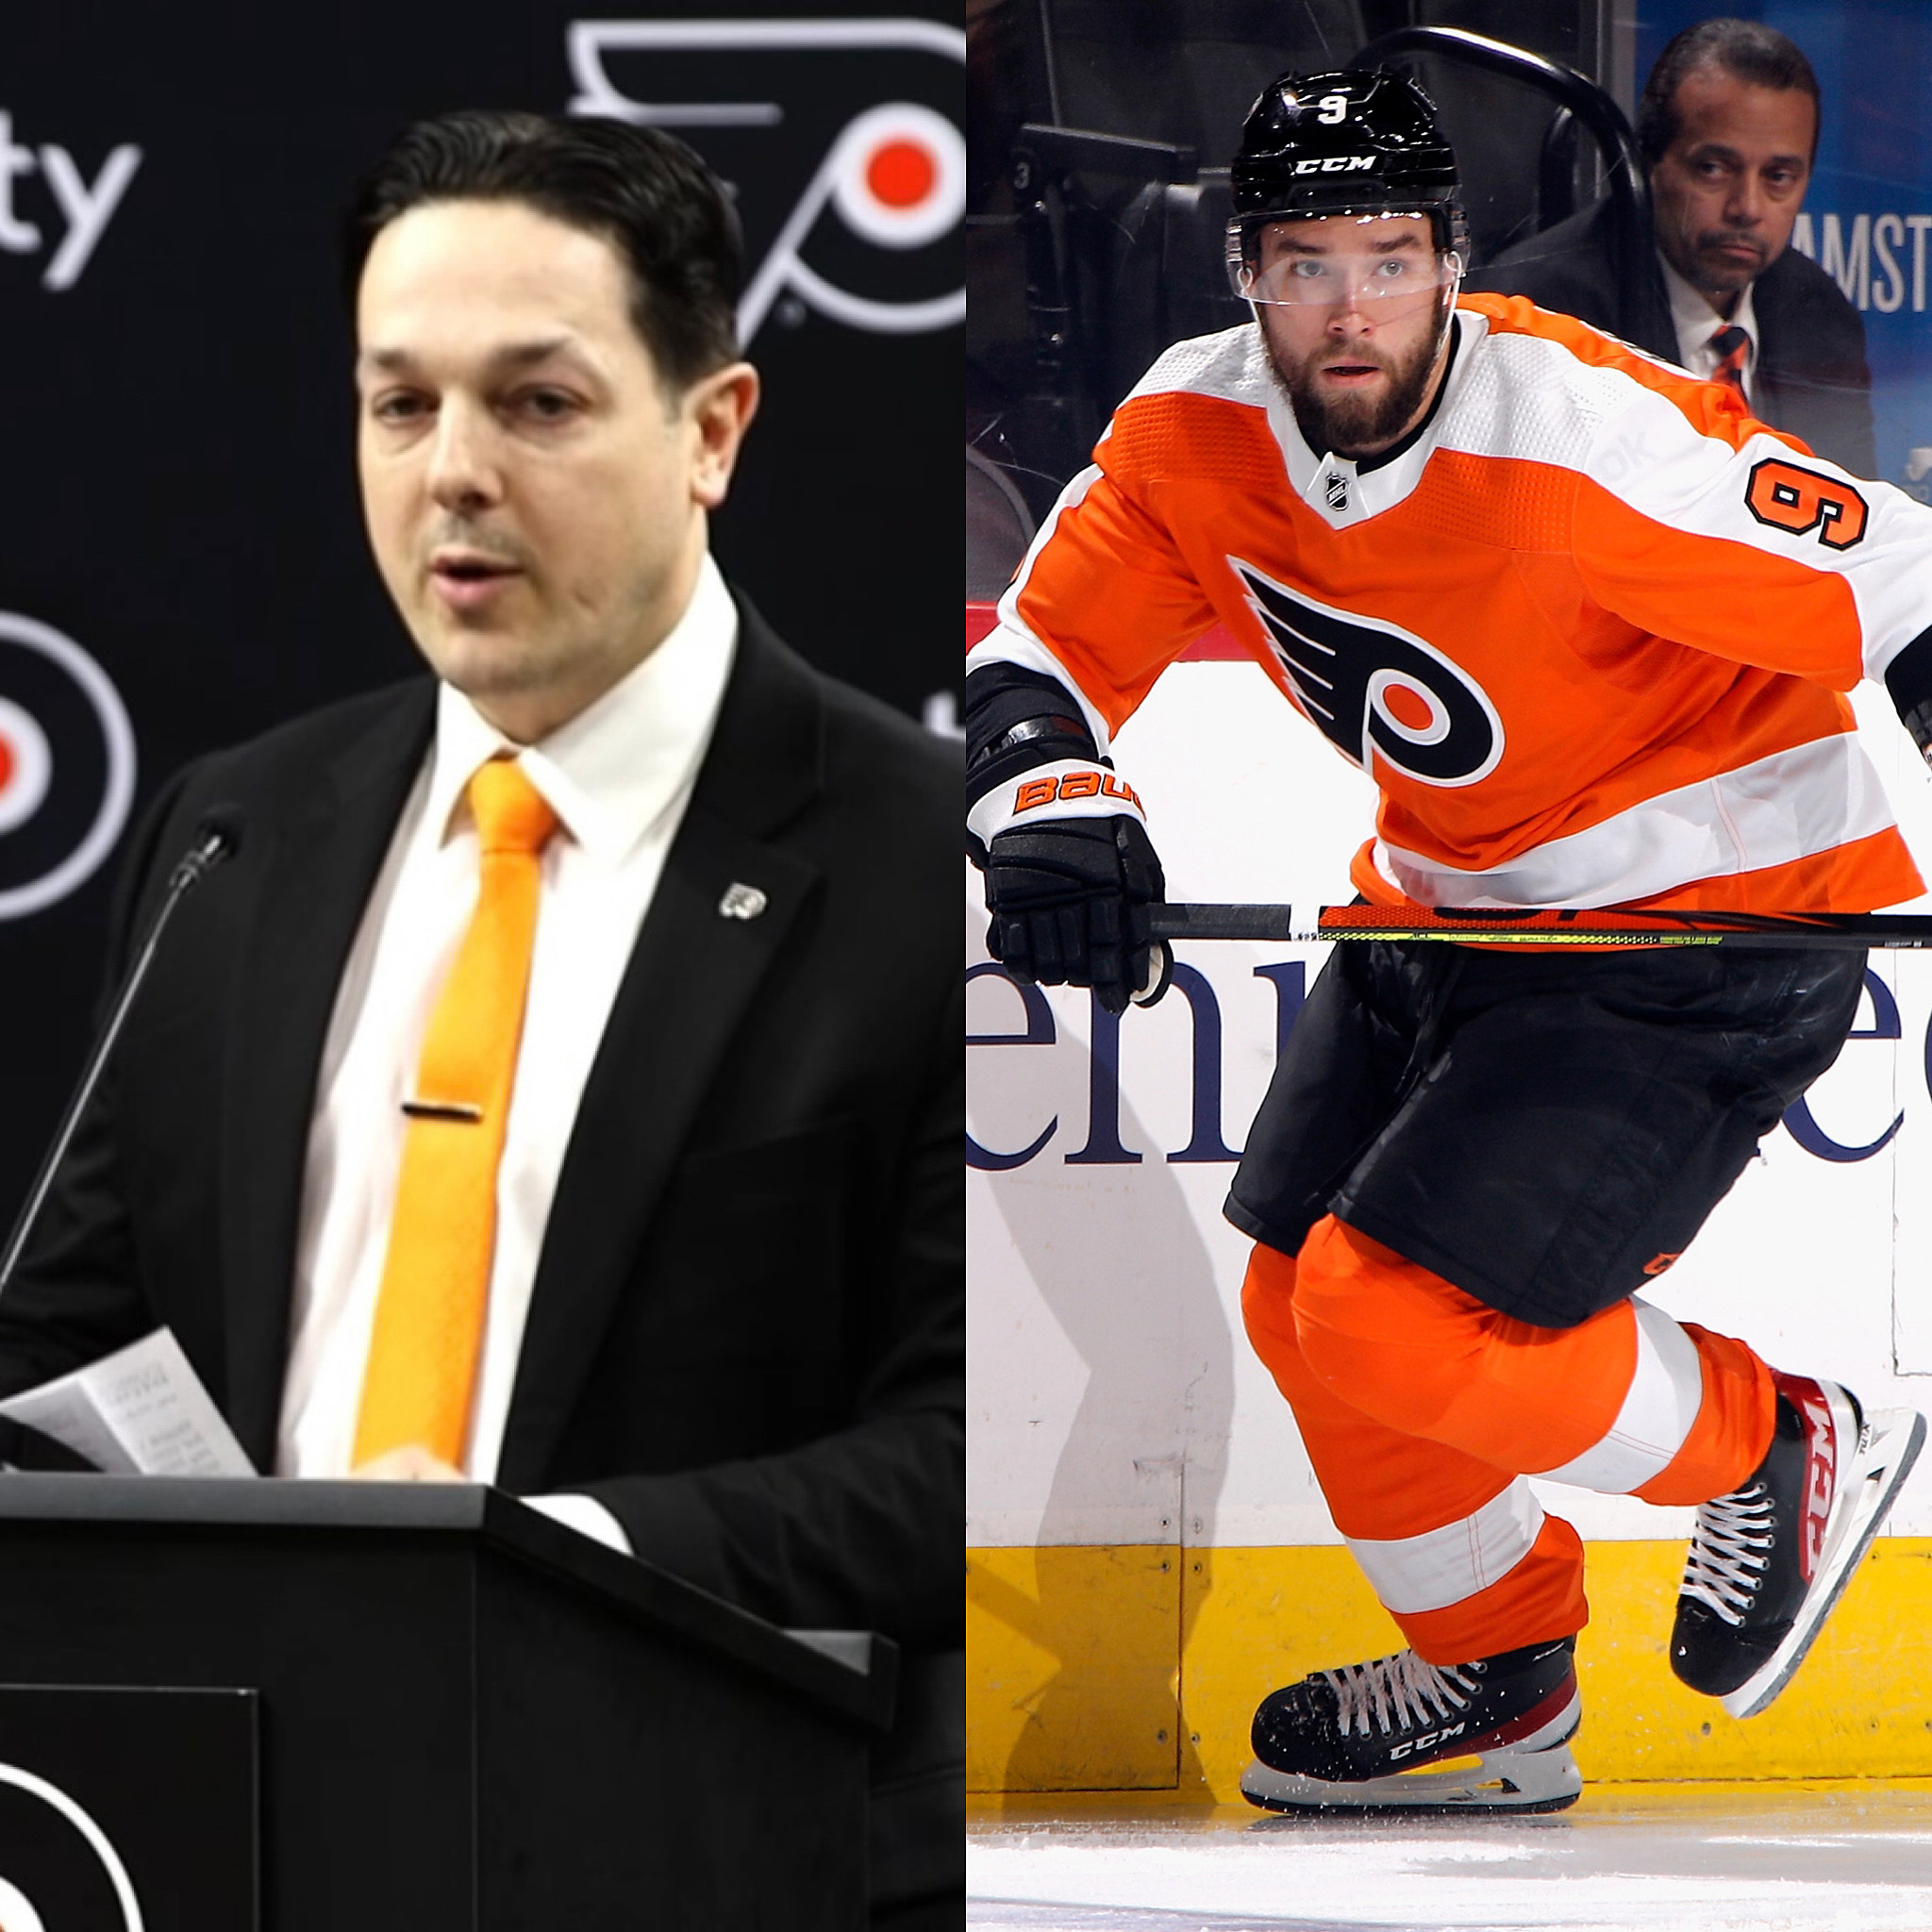 Briere's Blockbuster Shows Flyers are Indeed 'Open for Business'